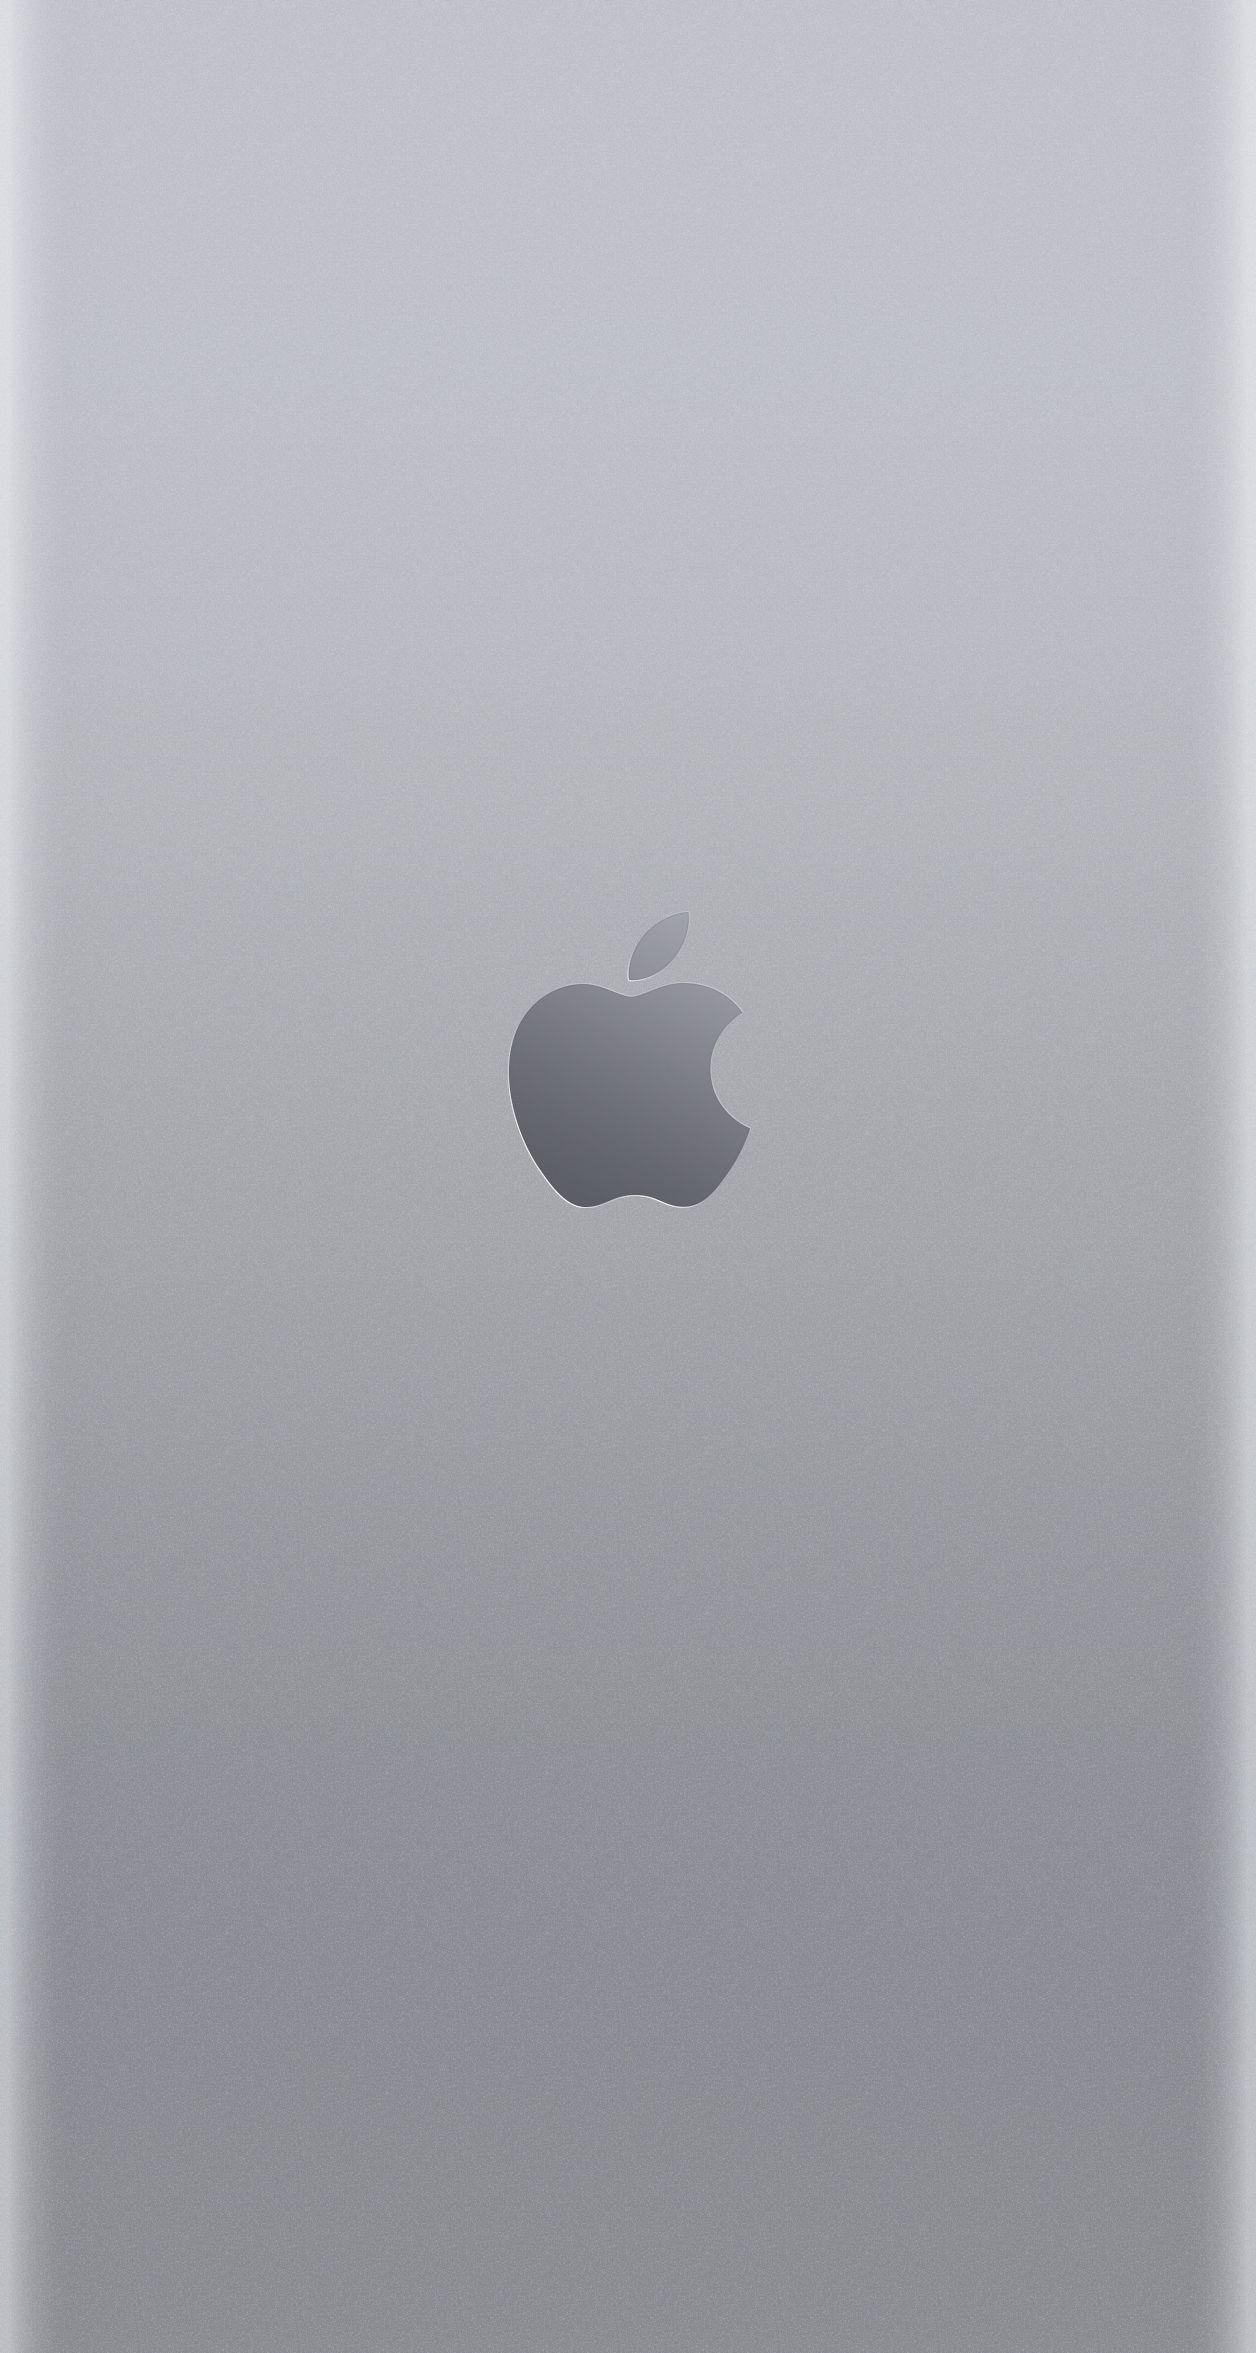 iPhone 5 Logo - Apple logo wallpapers for iPhone 6